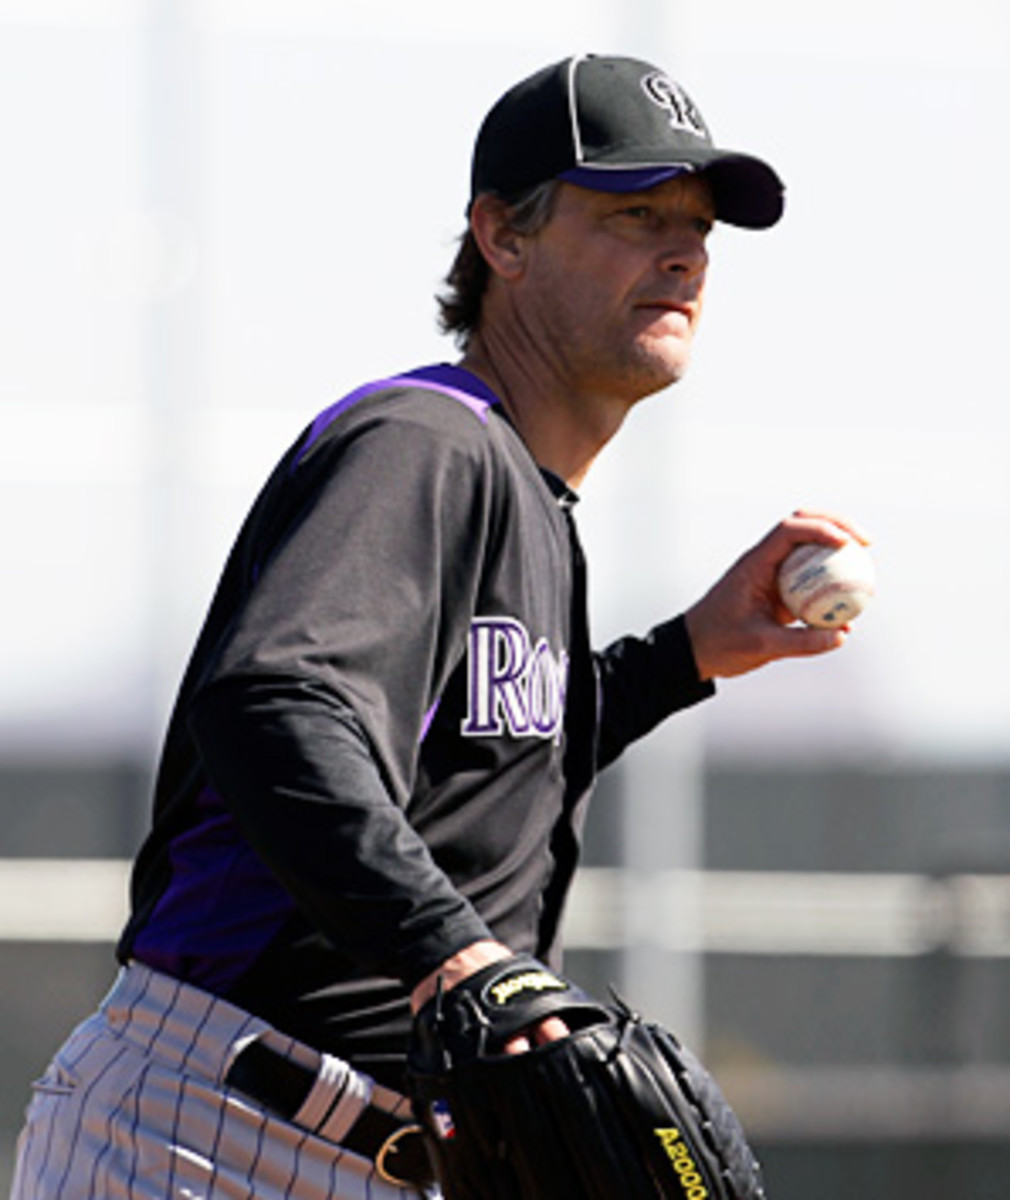 Jamie Moyer Will Give the Hall of Fame His Glove After He Breaks